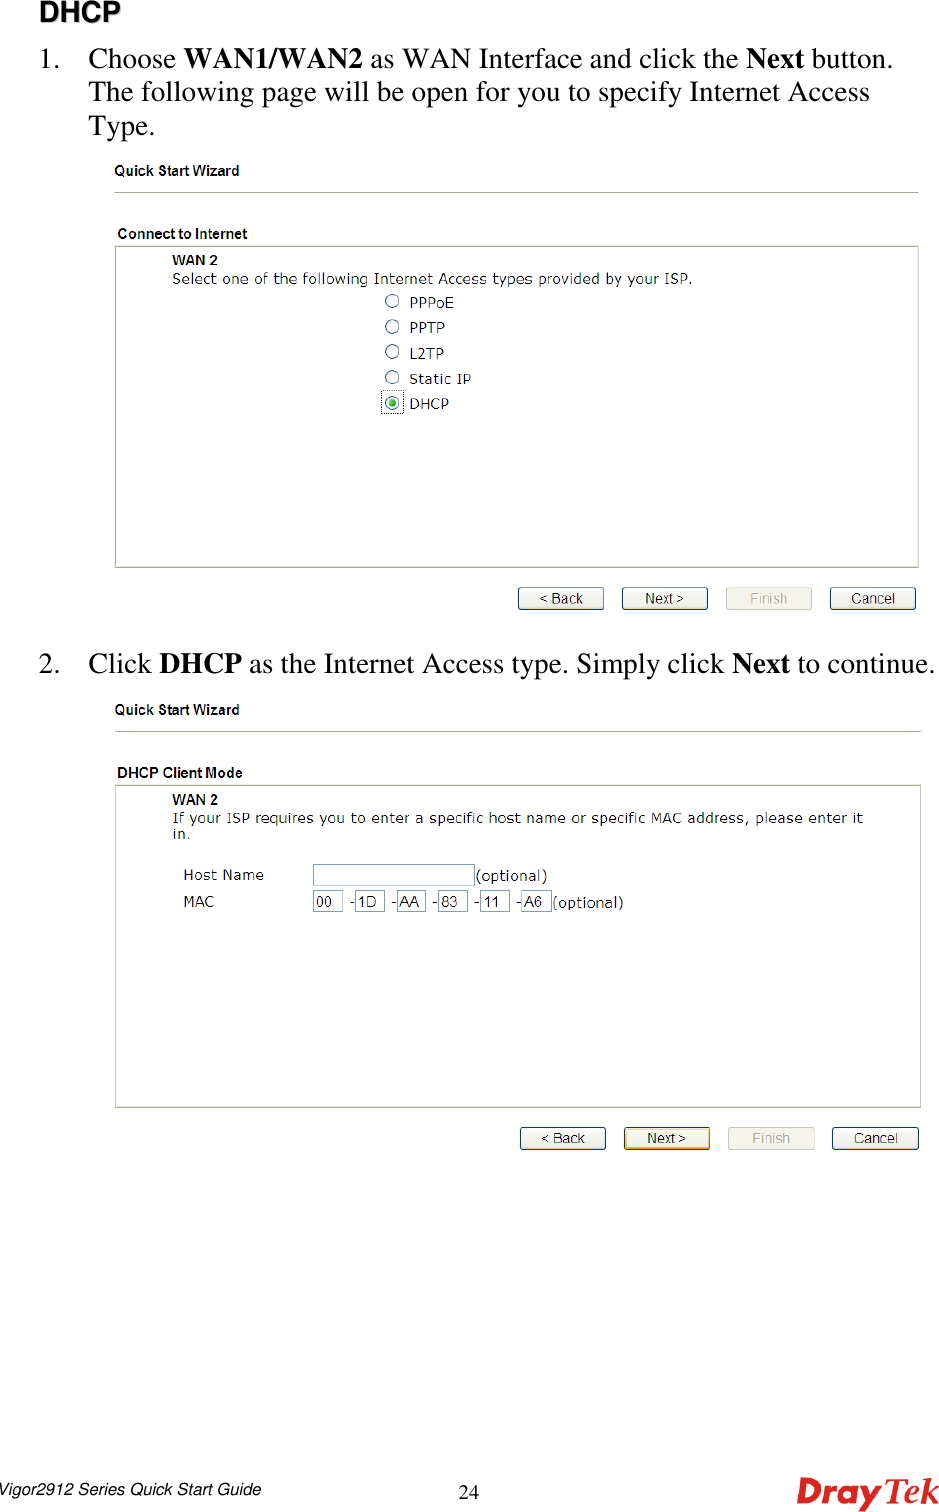  Vigor2912 Series Quick Start Guide 24DDHHCCPP  1. Choose WAN1/WAN2 as WAN Interface and click the Next button. The following page will be open for you to specify Internet Access Type.  2. Click DHCP as the Internet Access type. Simply click Next to continue.     